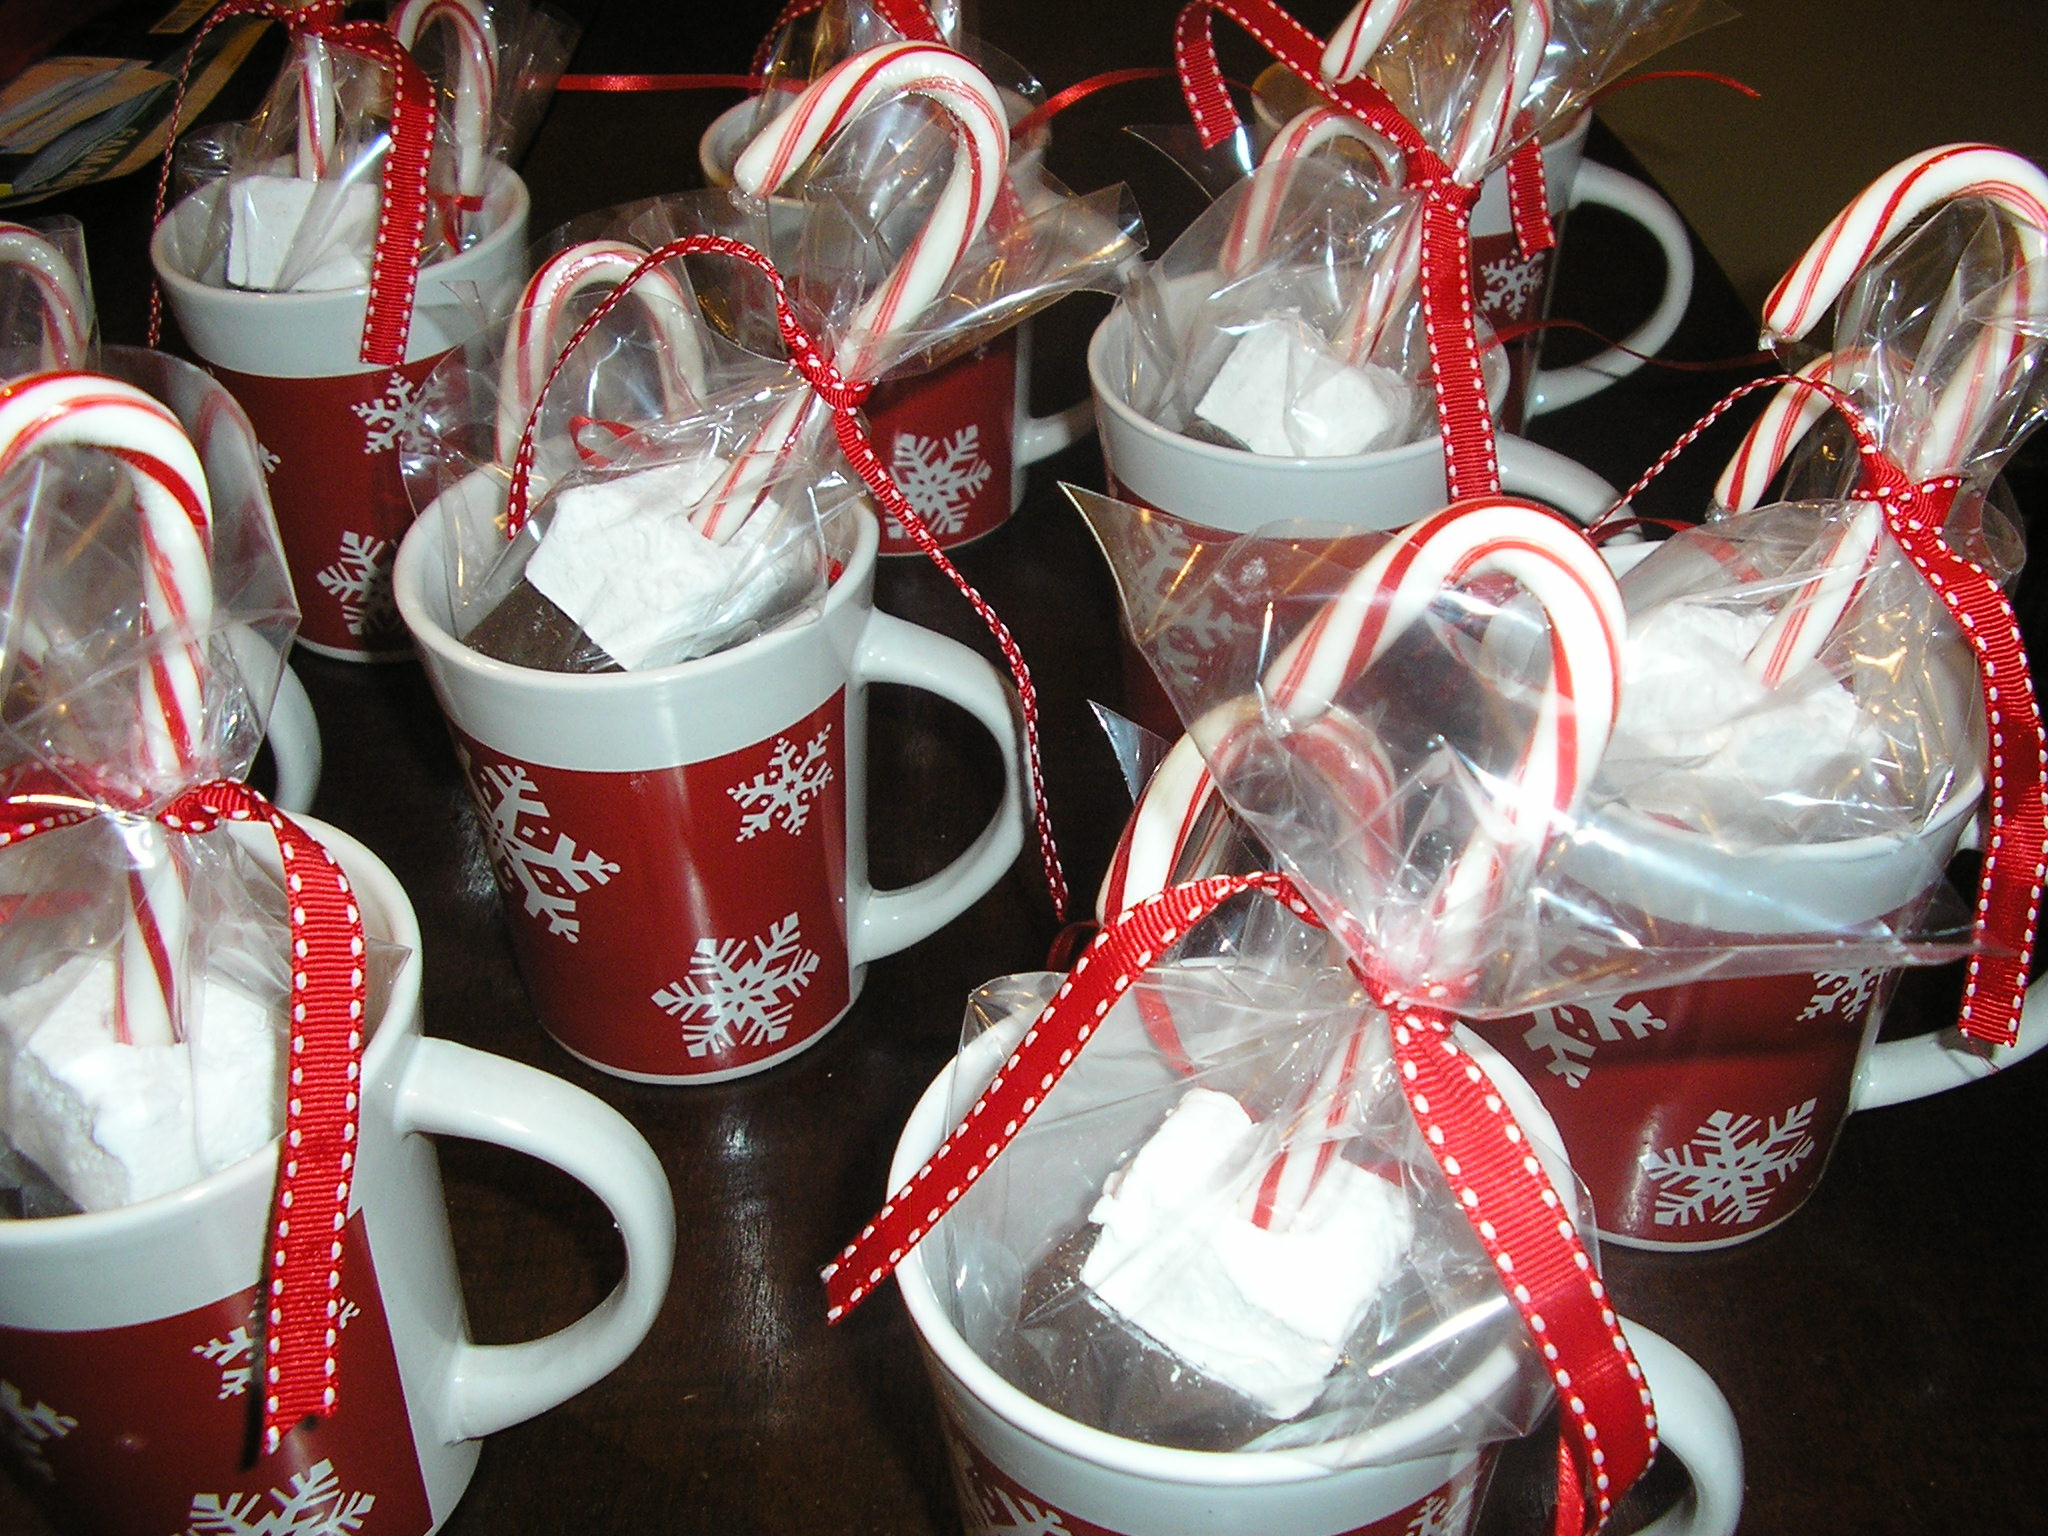 Sexy Holiday Gift Ideas
 Last Minute Gifts From My Kitchen – Hot Chocolate Done Two